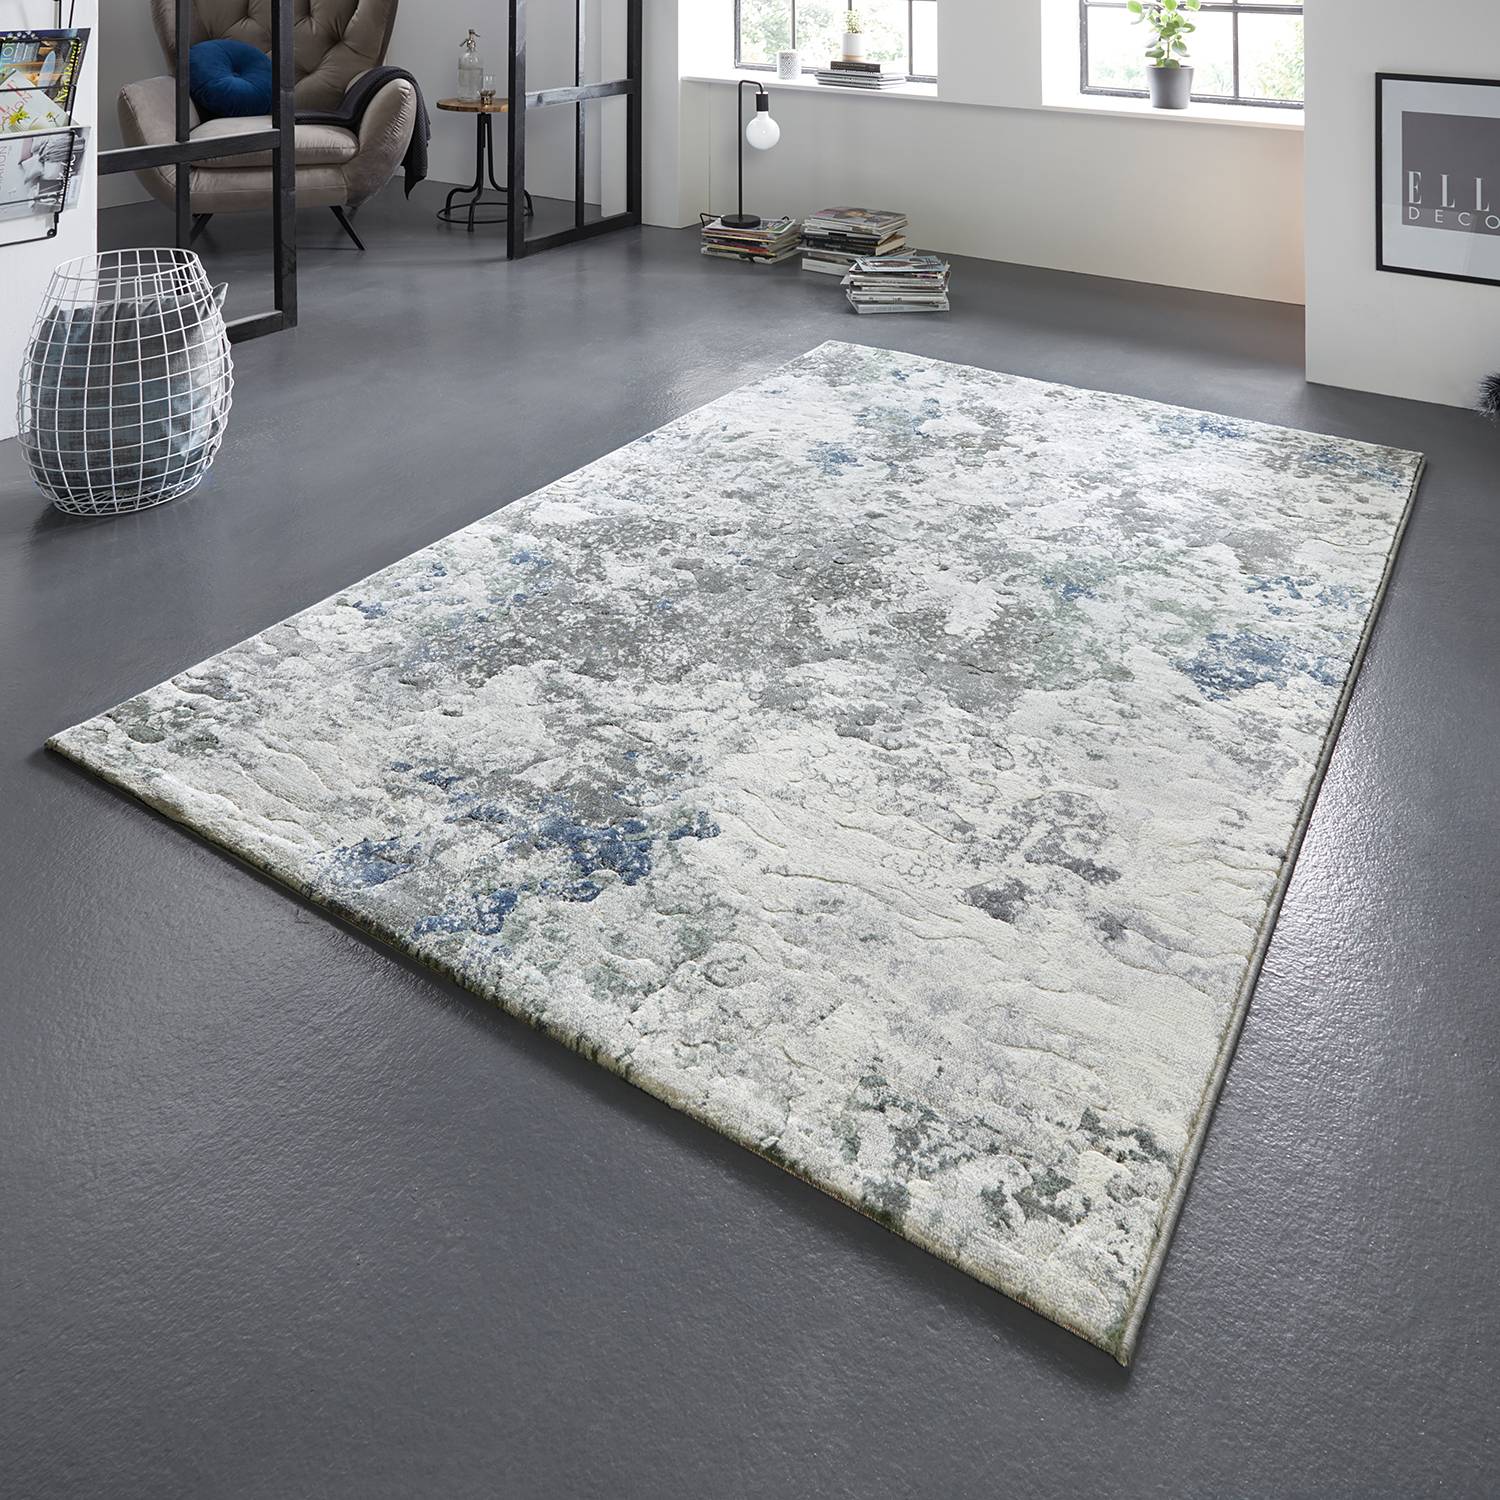 Image of Tapis Fontaine 000000001000168258